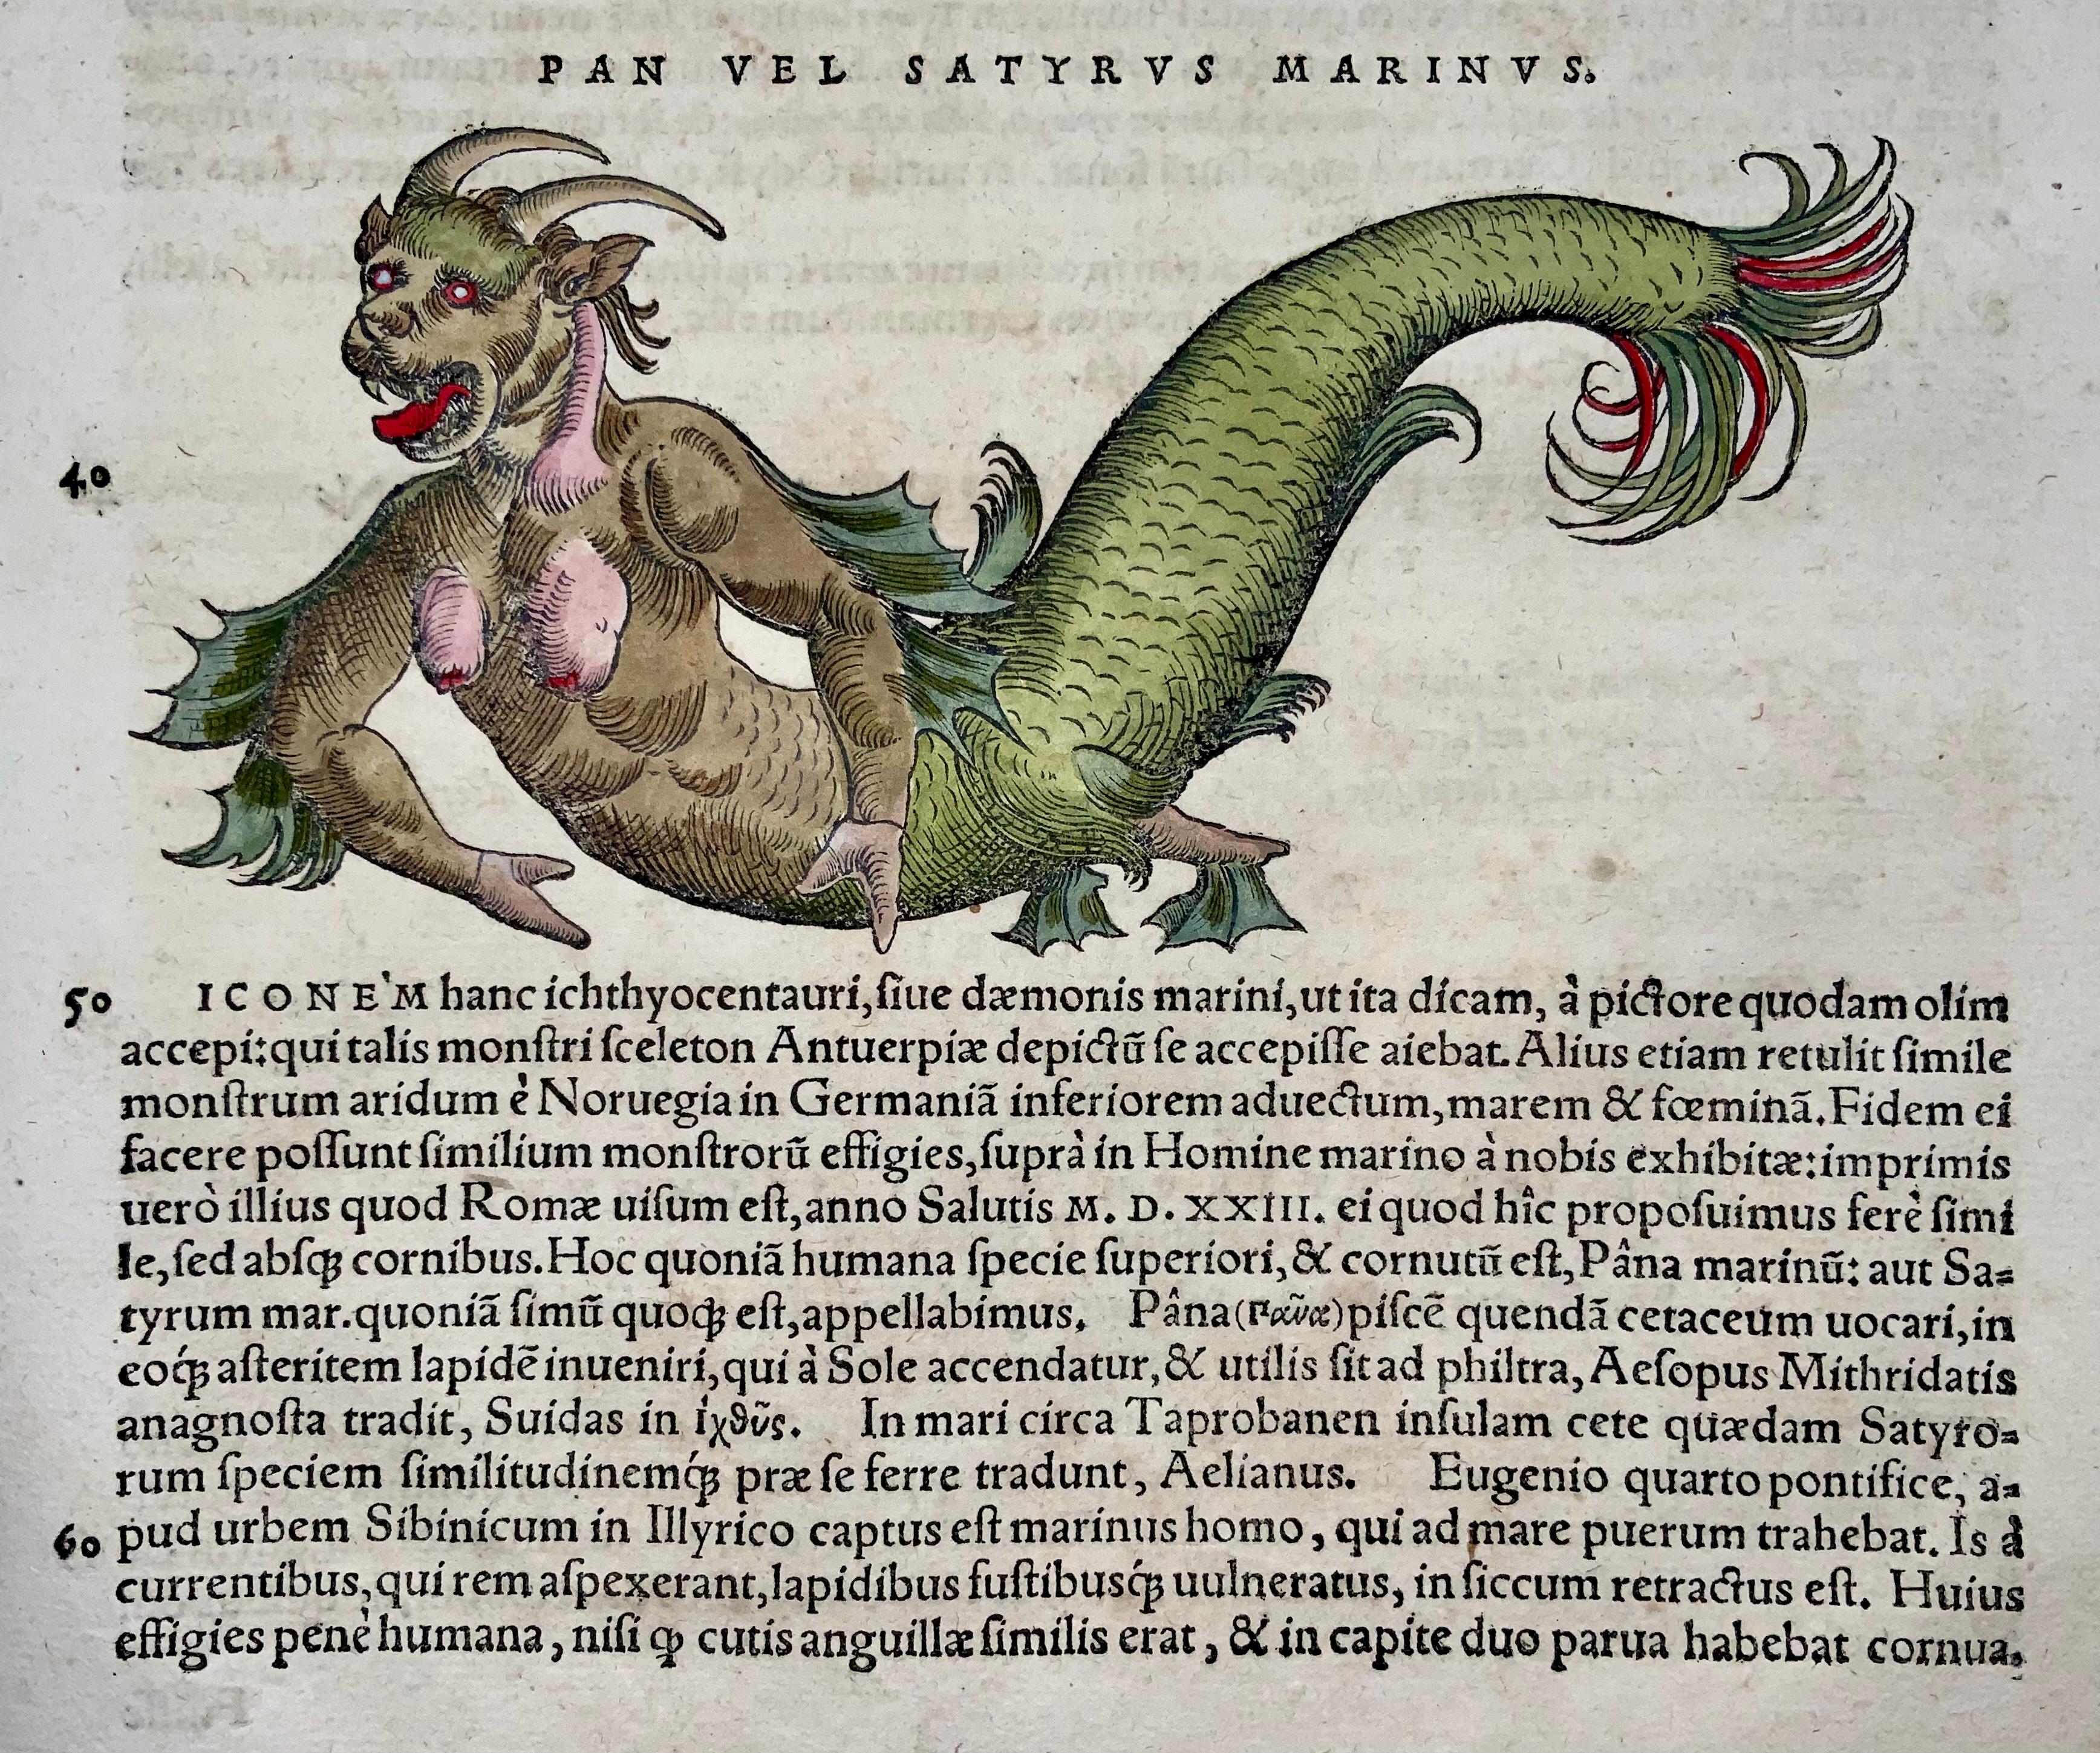 Pan vel satyrus marinus

In Gesner's chapter on Tritons, this fascinting creature labeled 